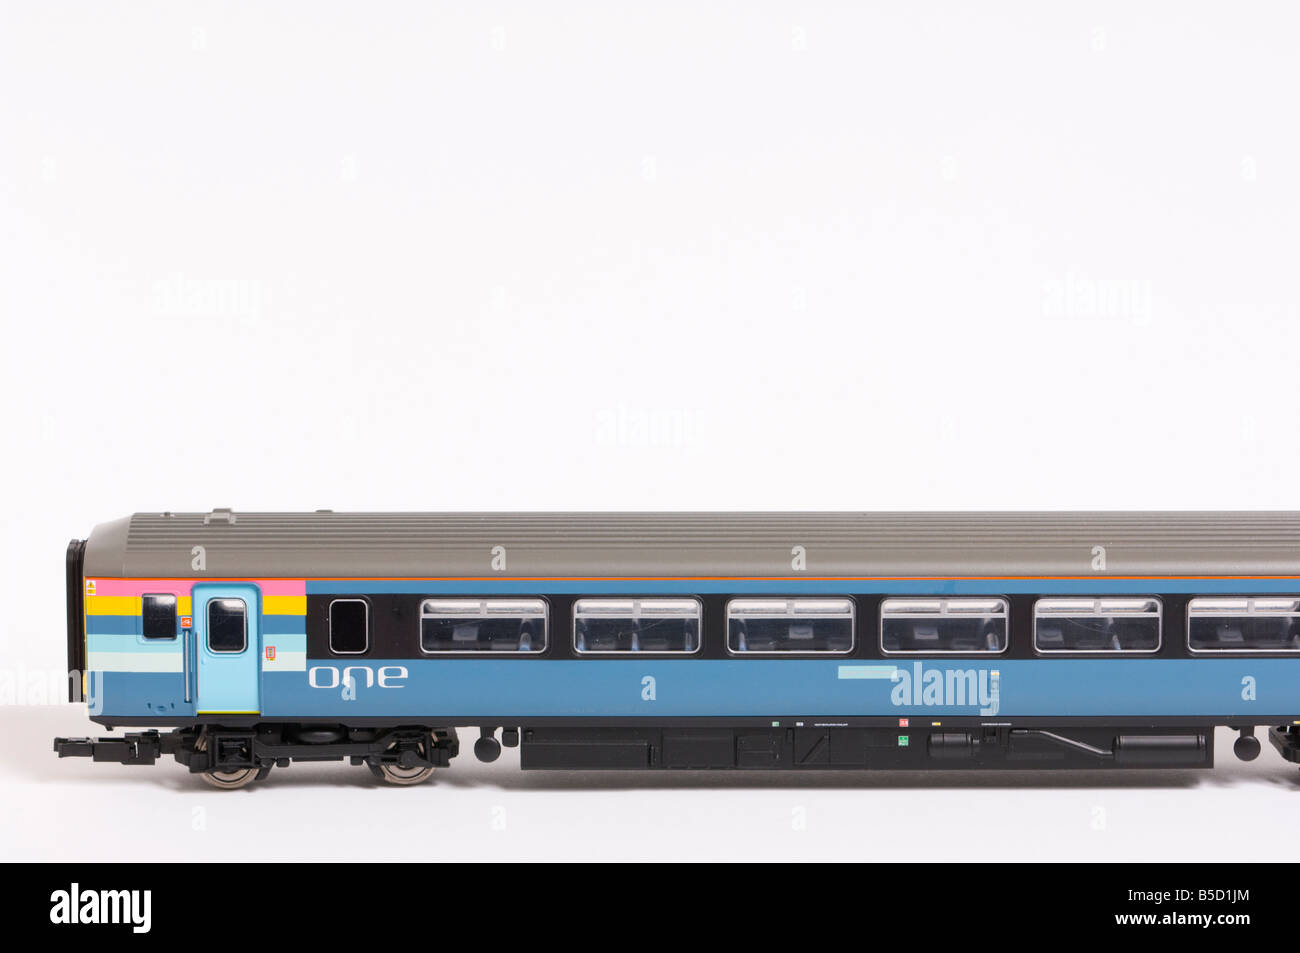 Close up of a  Hornby electric diesel model train in one livery shot against a white background (cut out) in a studio Stock Photo